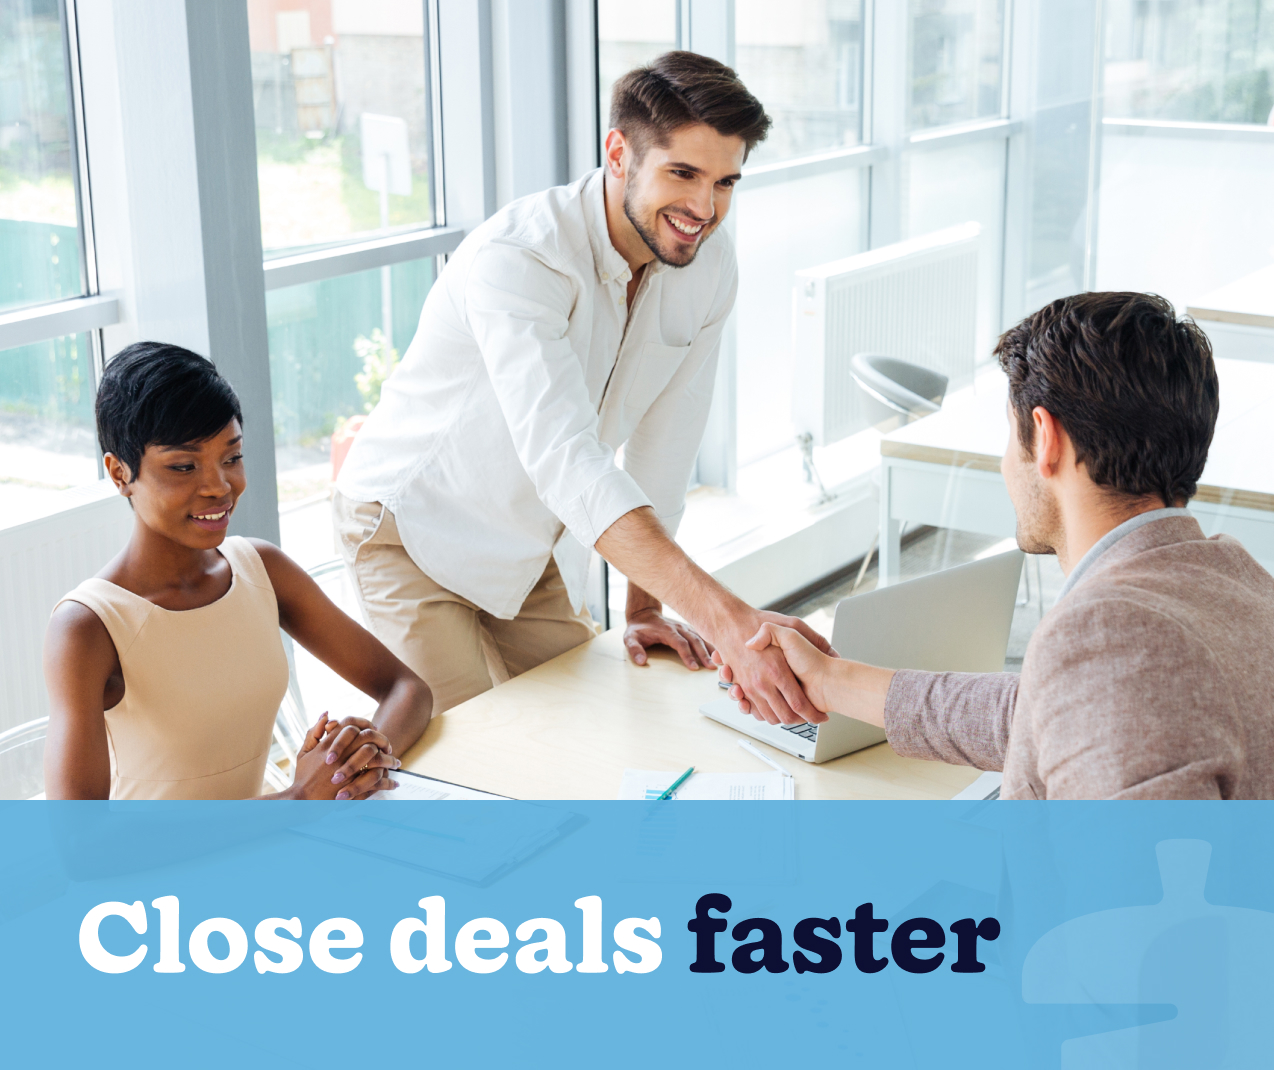 A CRM helps you close deals faster